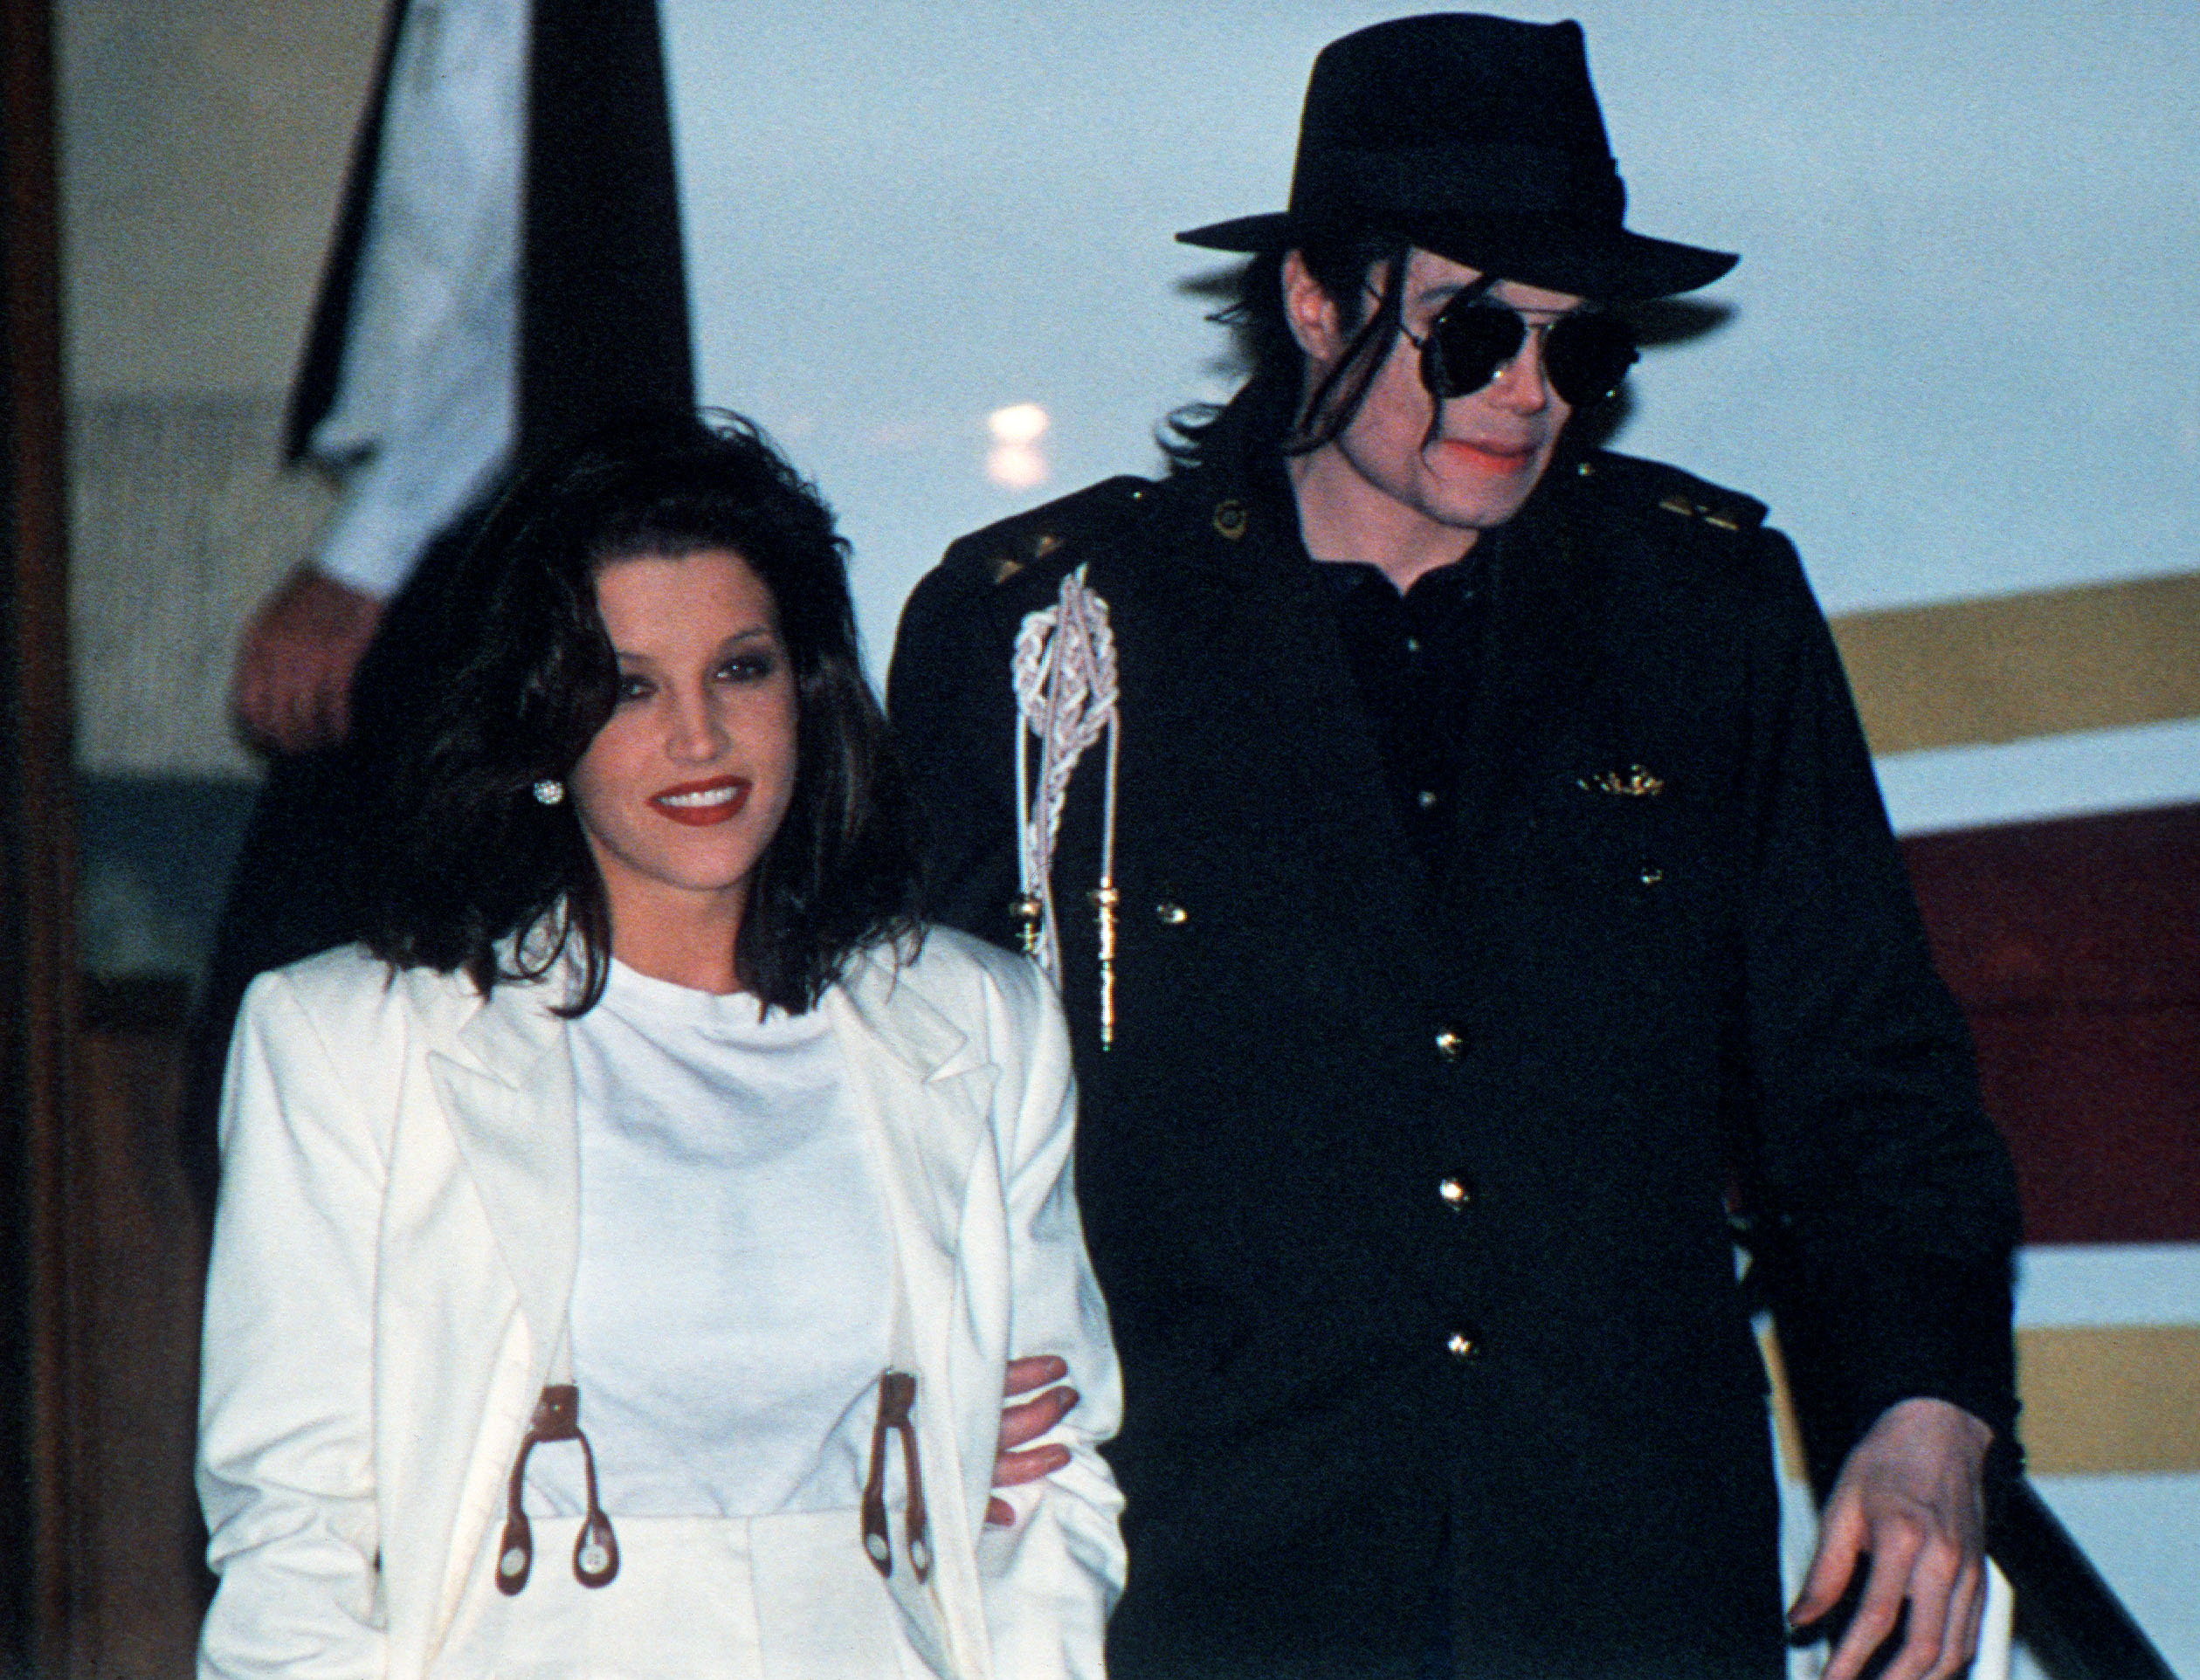 Young Lisa Marie Presley From Elvis’ Daughter to Michael Jackson Wife